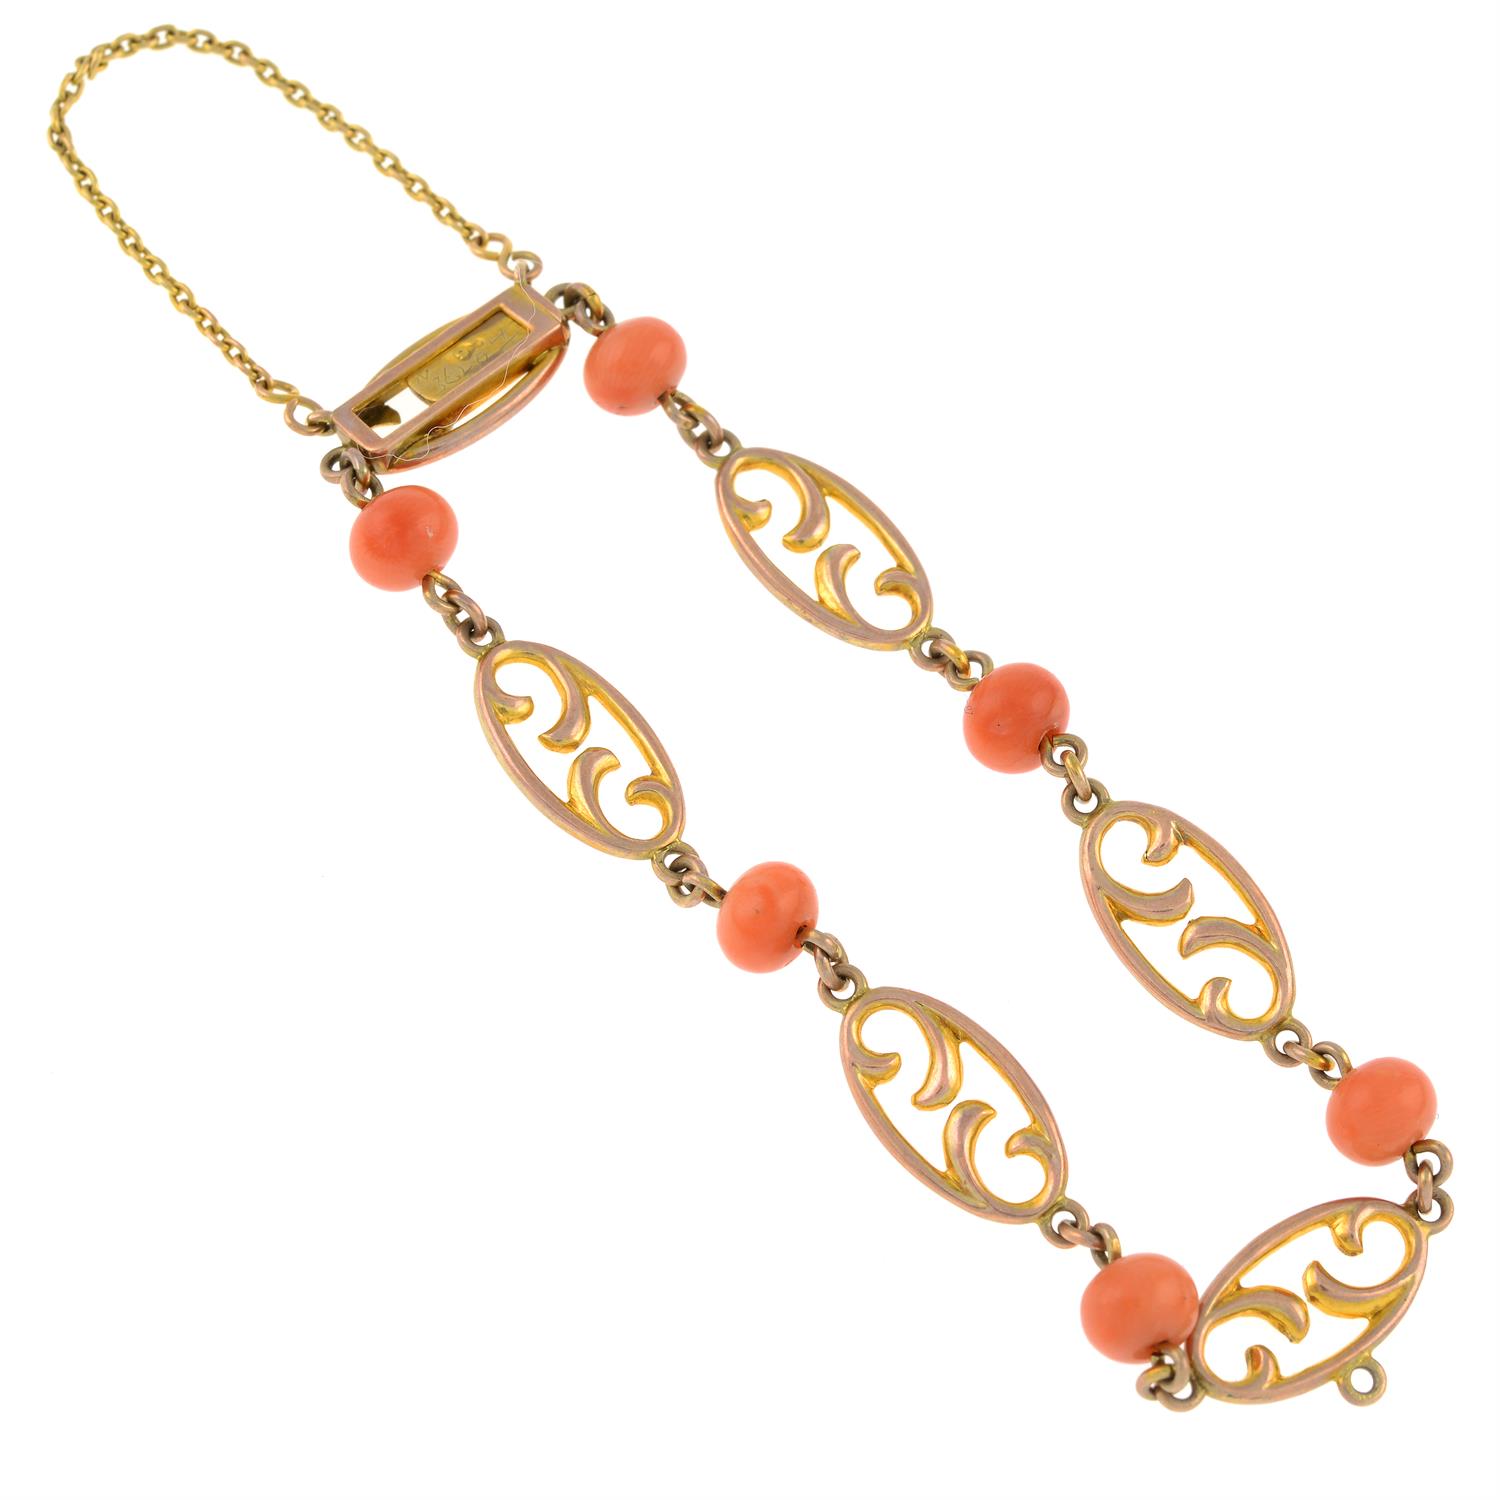 An early 20th century 9ct gold openwork link bracelet, with coral spacers. - Image 2 of 2